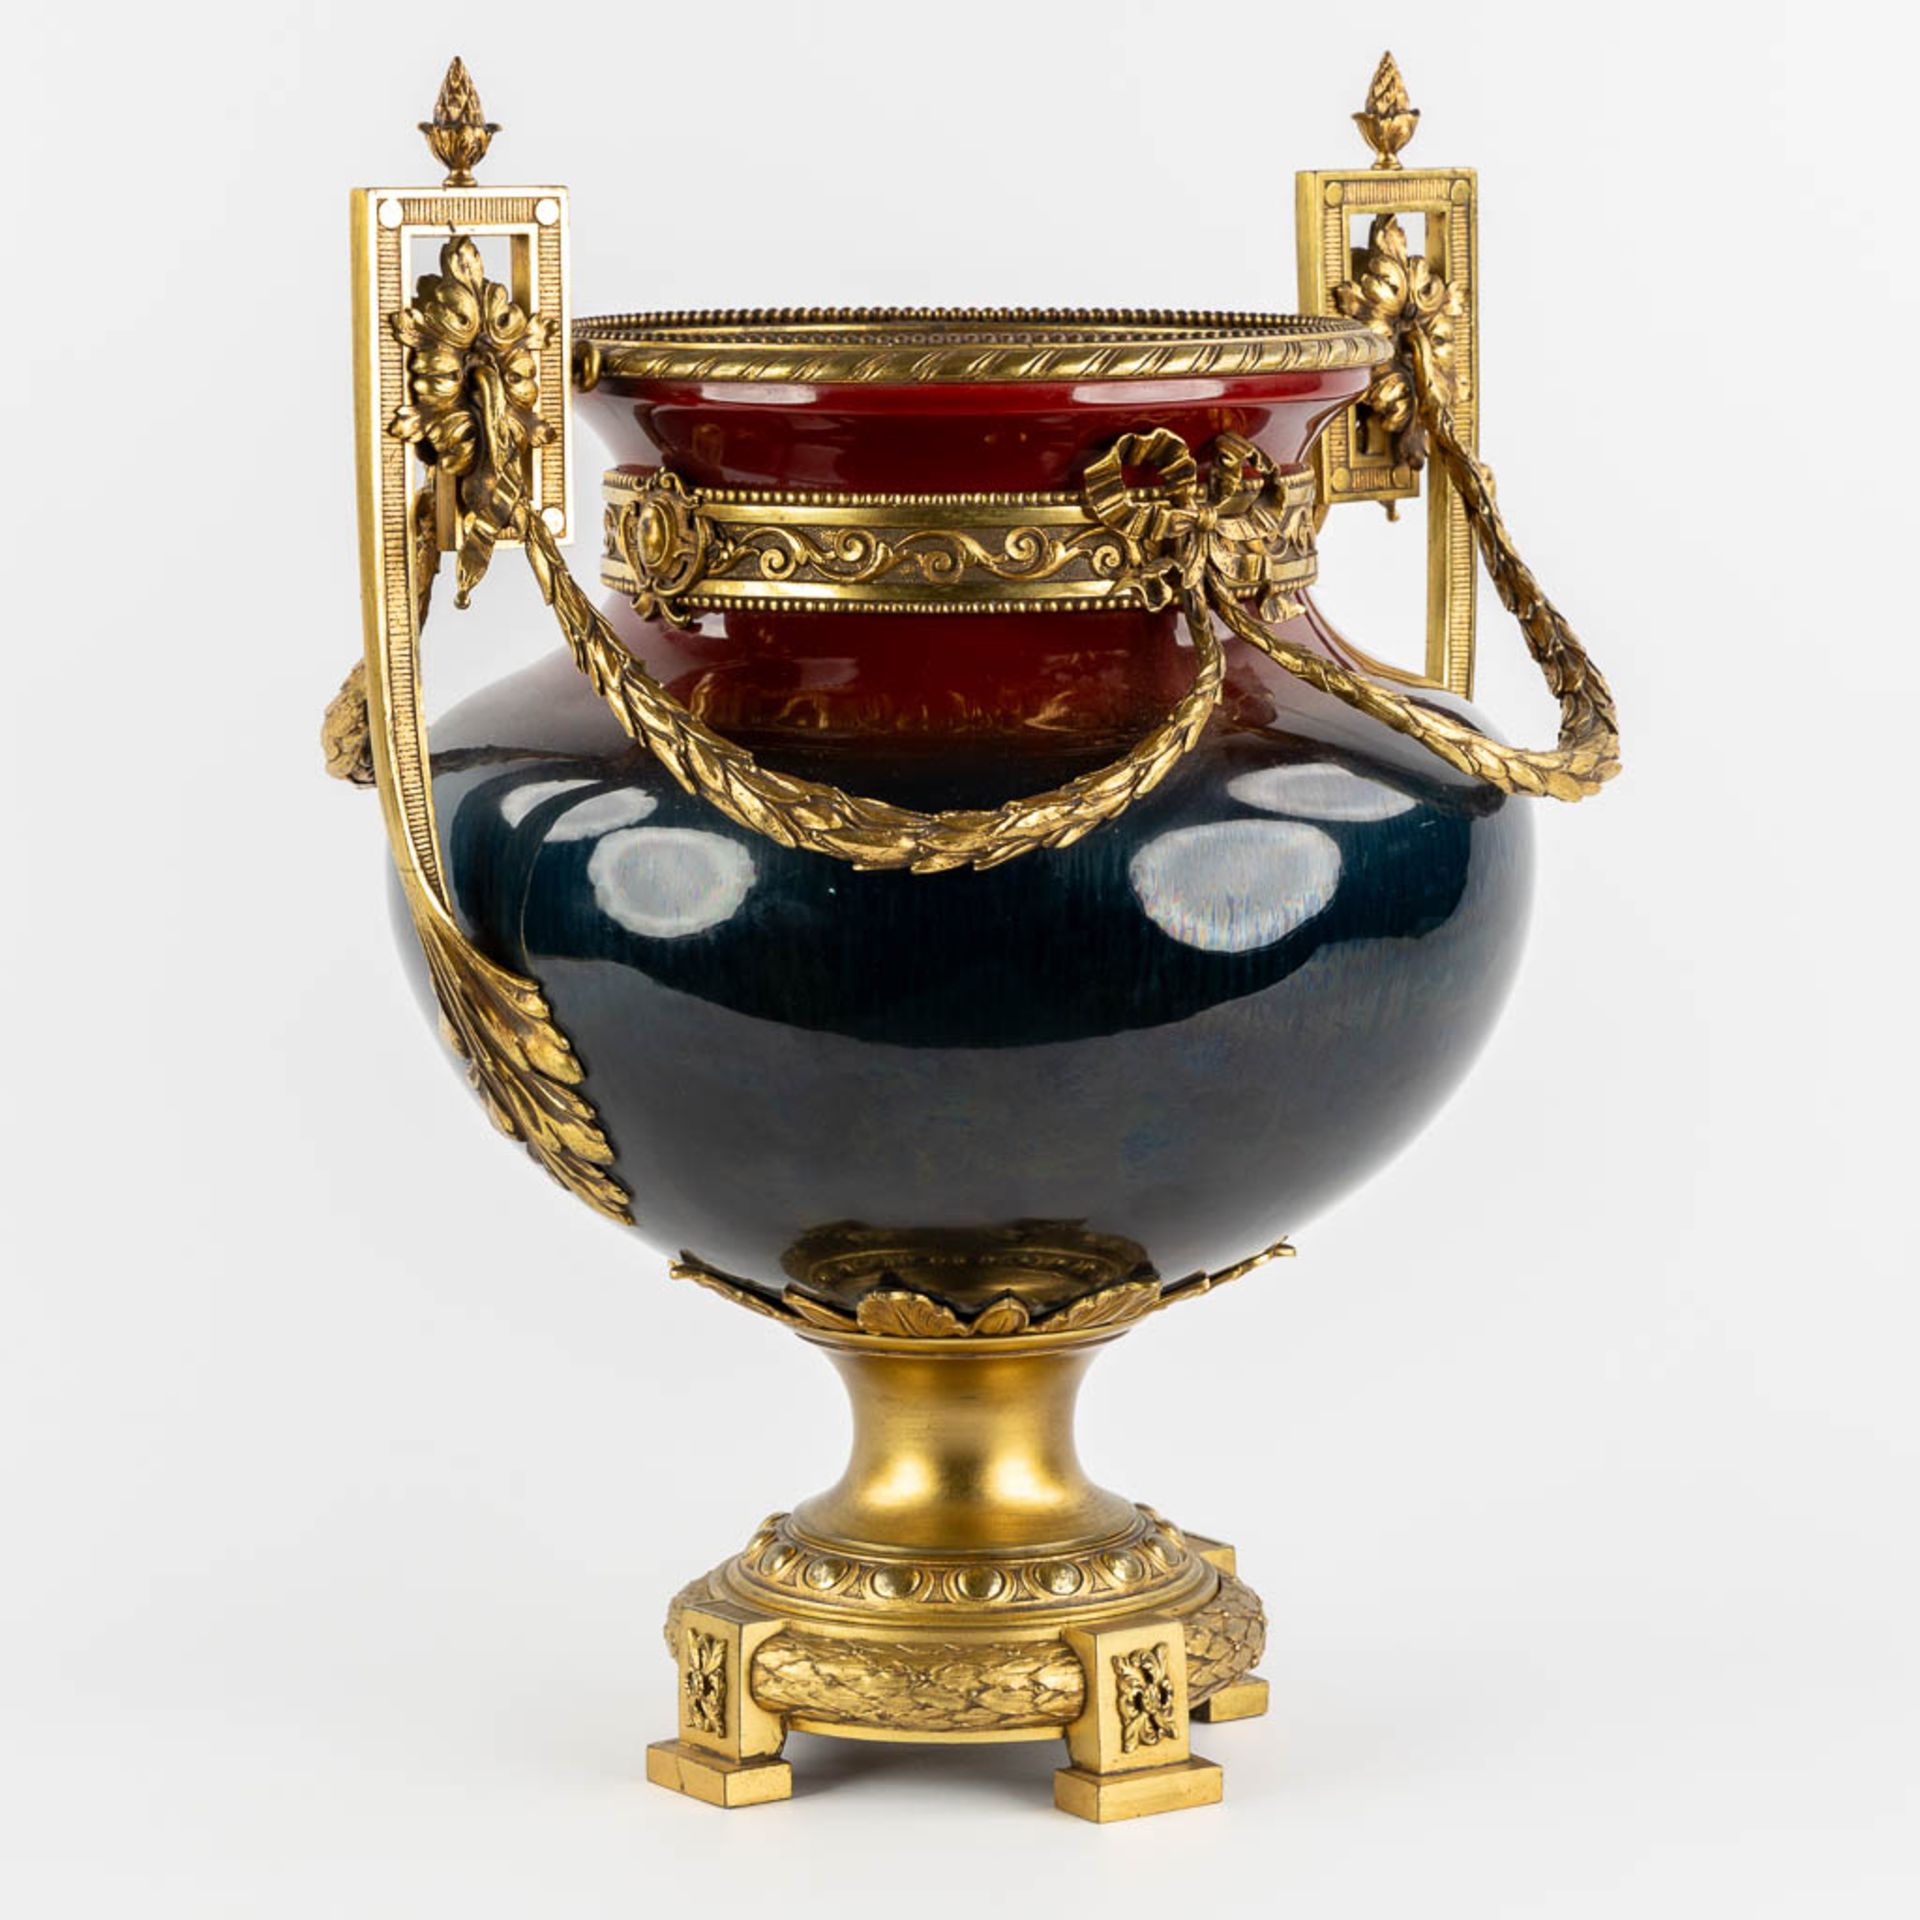 A large faience vase mounted with gilt bronze in Louis XV style. Circa 1900. (L:34 x W:40 x H:50 cm) - Bild 3 aus 12